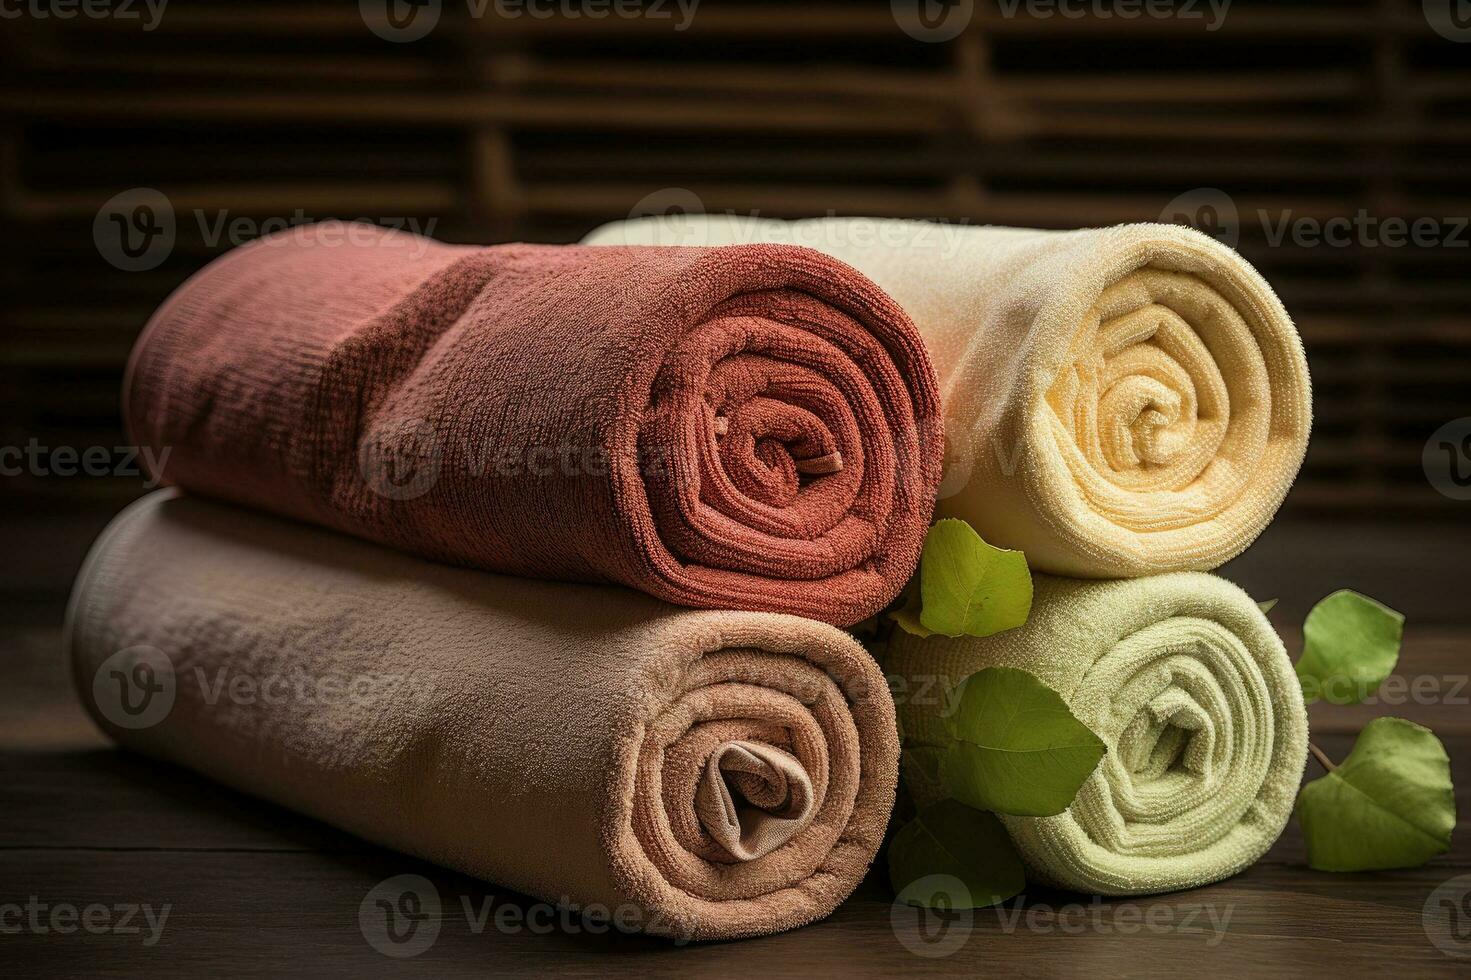 Rolled and prepared towels for guest use. photo